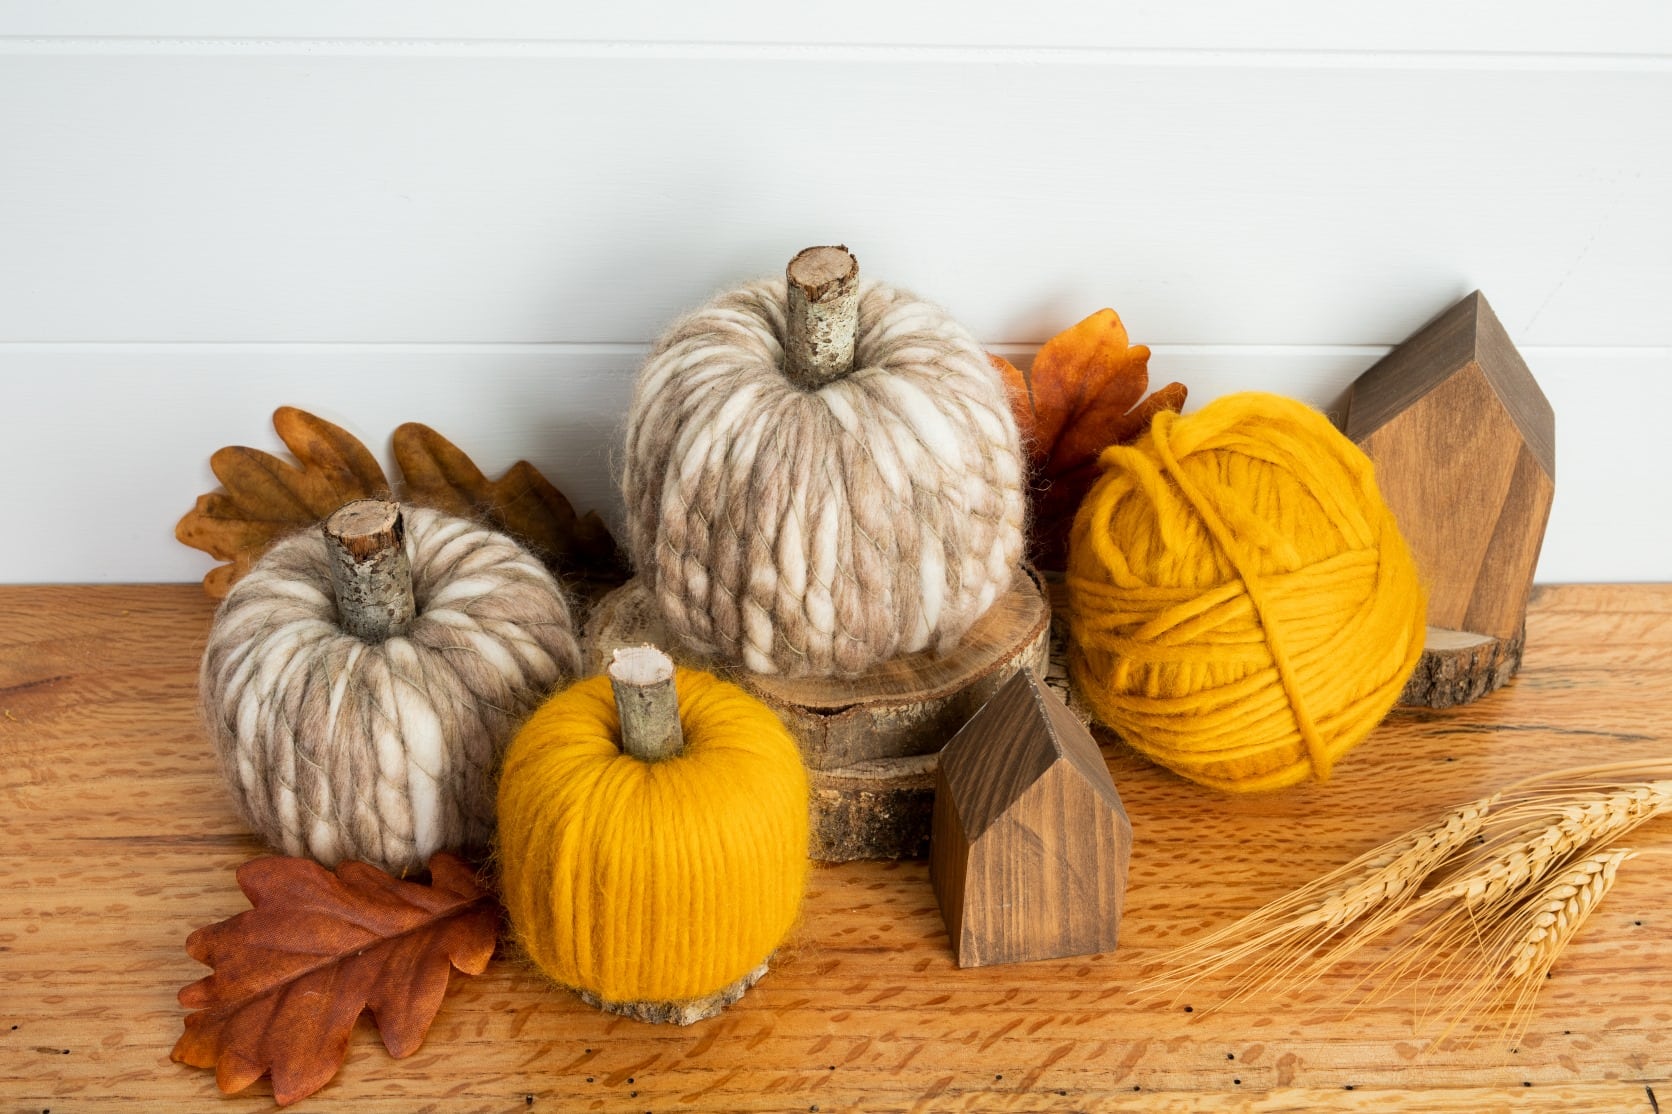 Group of yarn wrapped pumpkins